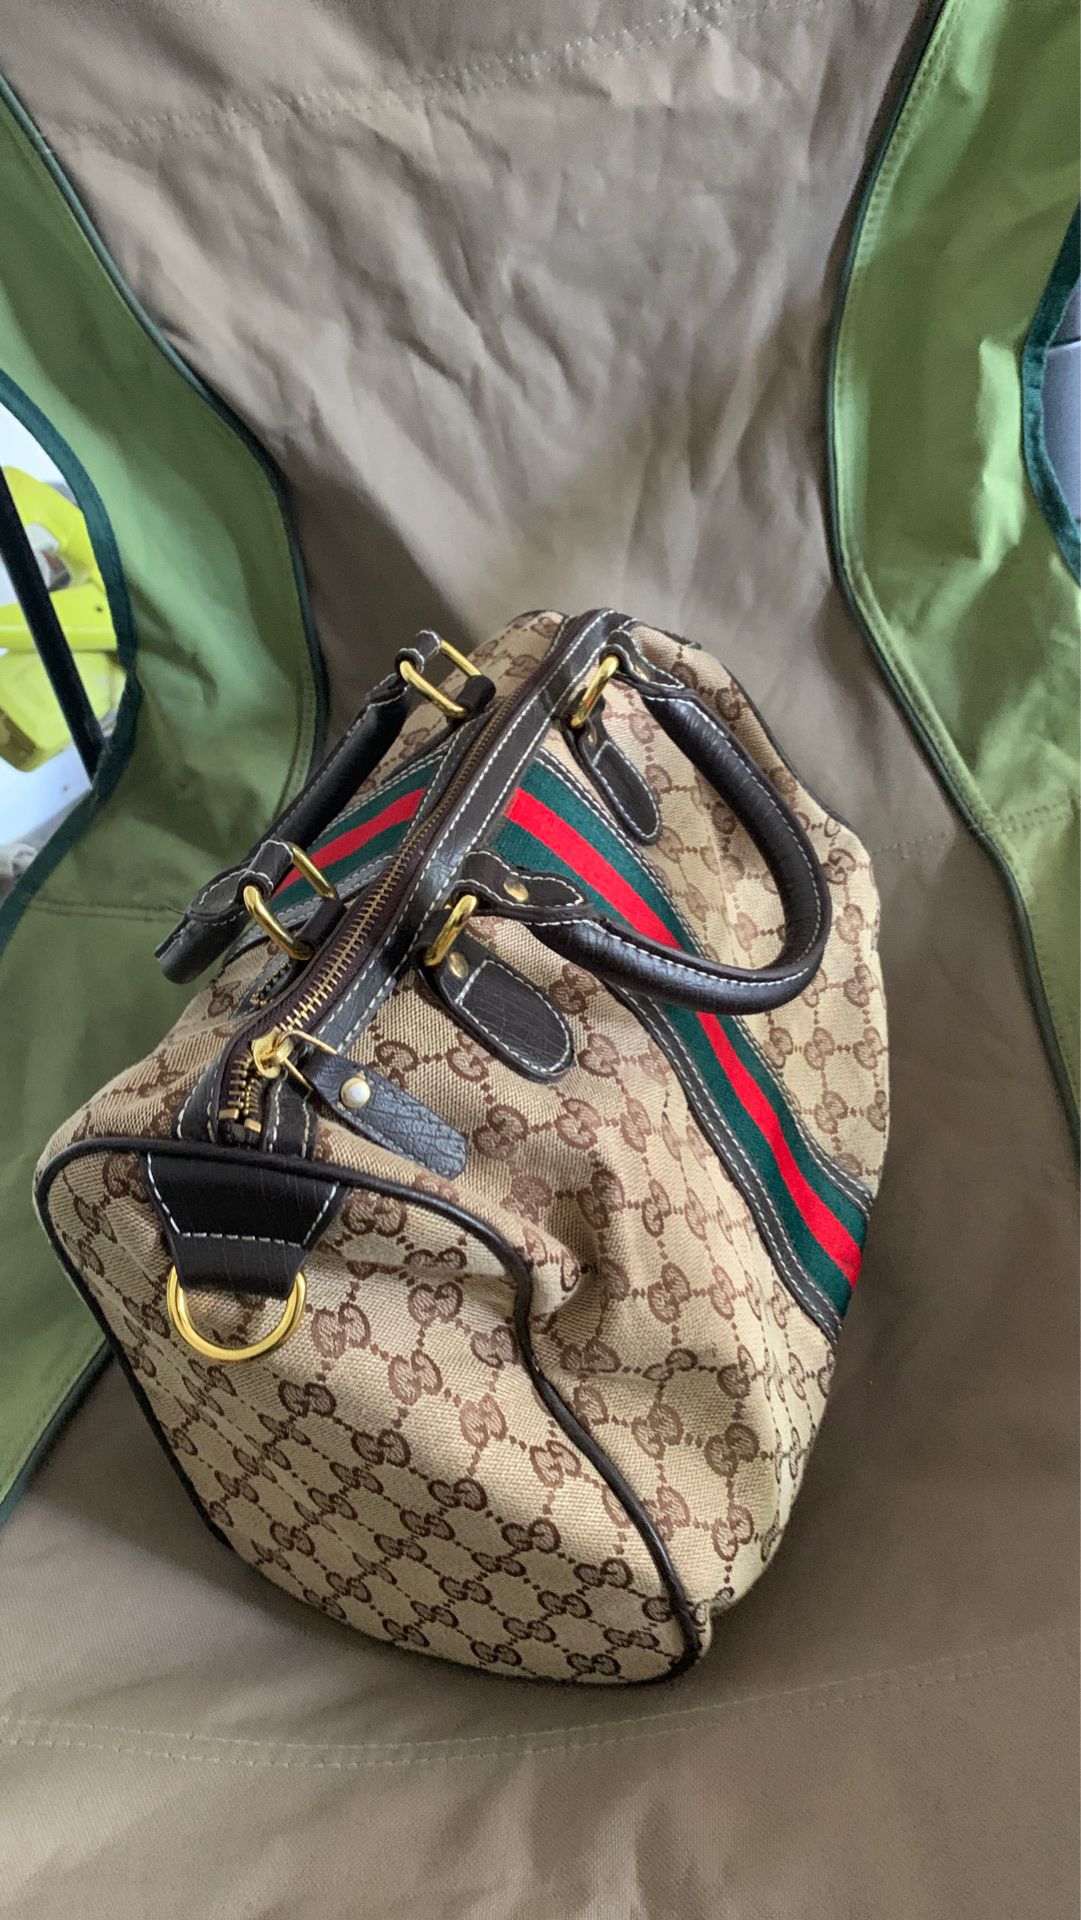 Gucci Bag and Carry Case